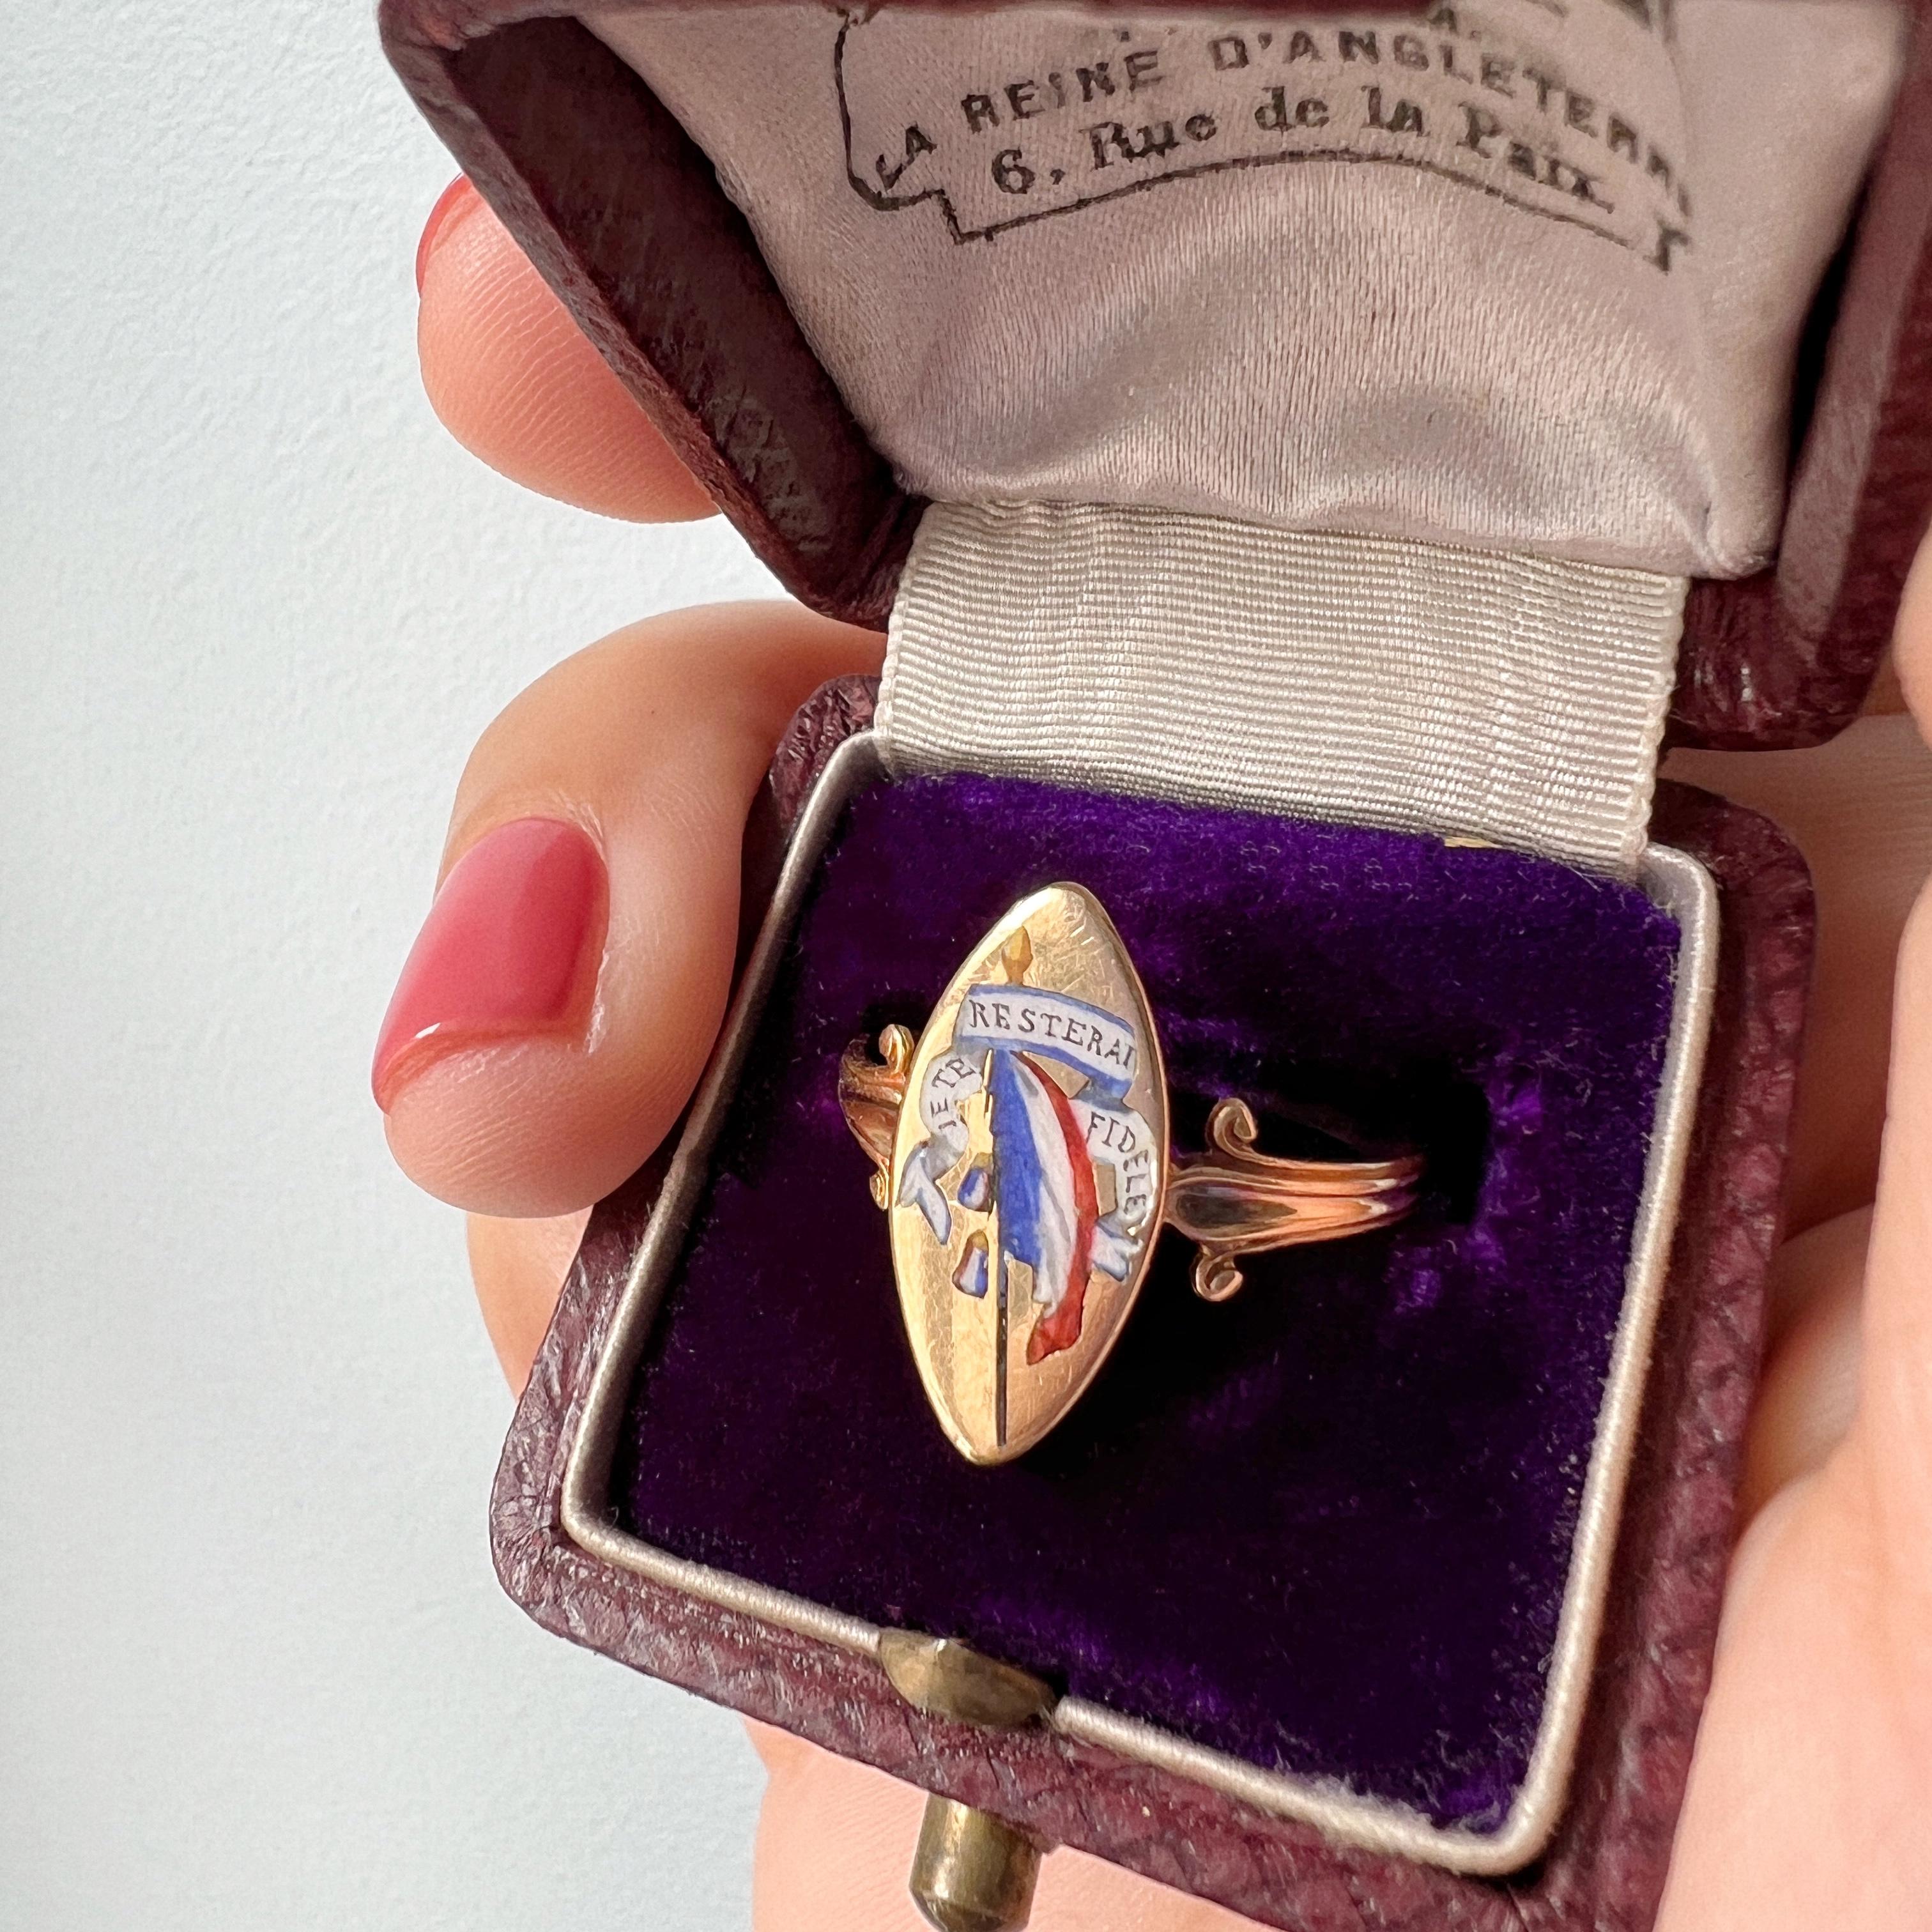 For sale a rare 18K gold French ring from the 19th Century, as an extraordinary relic of French history and patriotism.

At the heart of the ring is a meticulously enameled motif depicting the proud colors of the French flag: blue, white, and red.